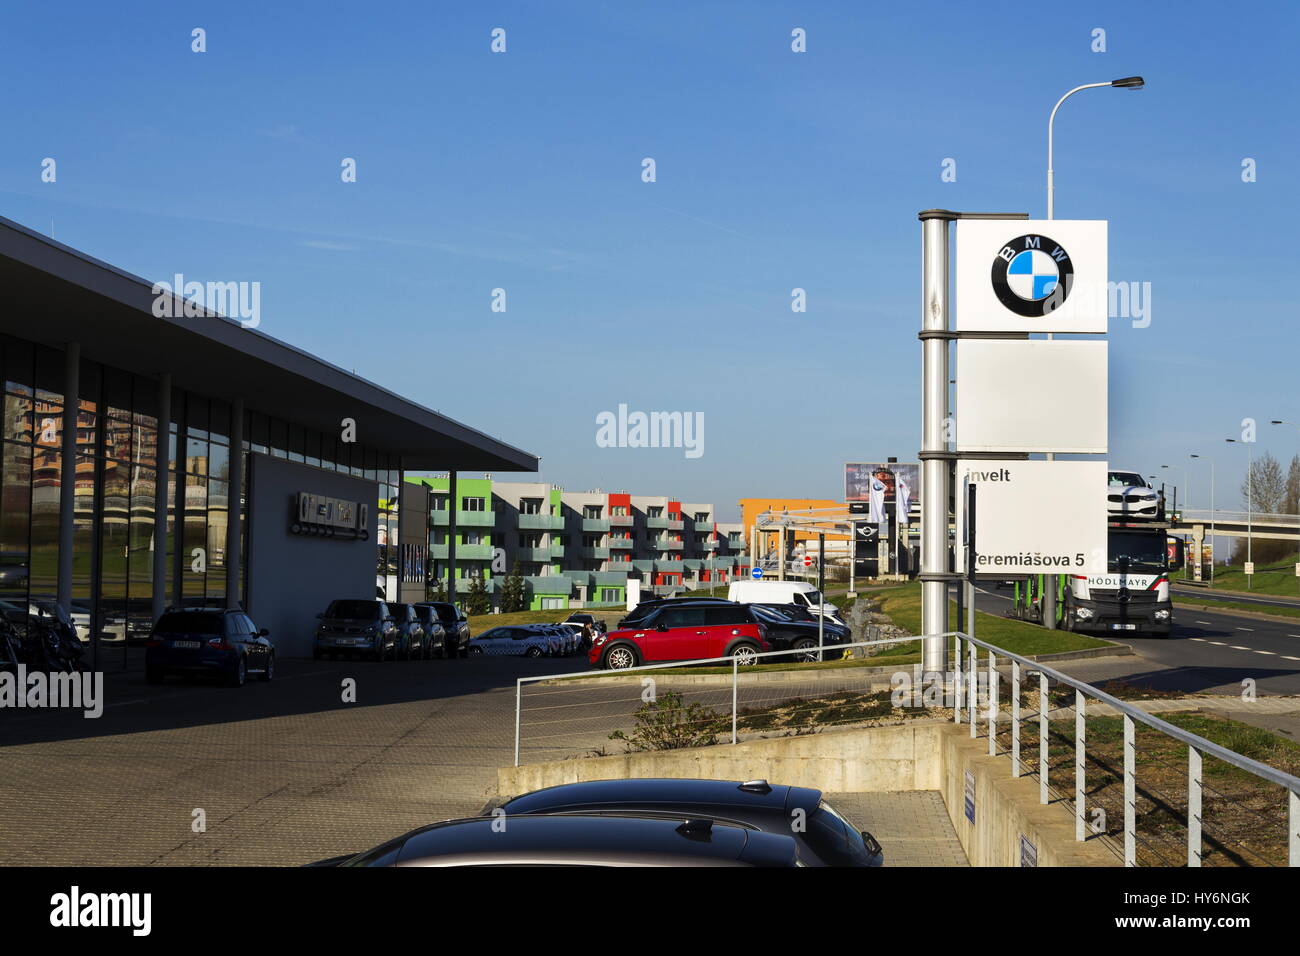 PRAGUE, CZECH REPUBLIC - MARCH 31: BMW car company logo in front of dealership building on March 31, 2017 in Prague, Czech republic. UK BMW workers ba Stock Photo